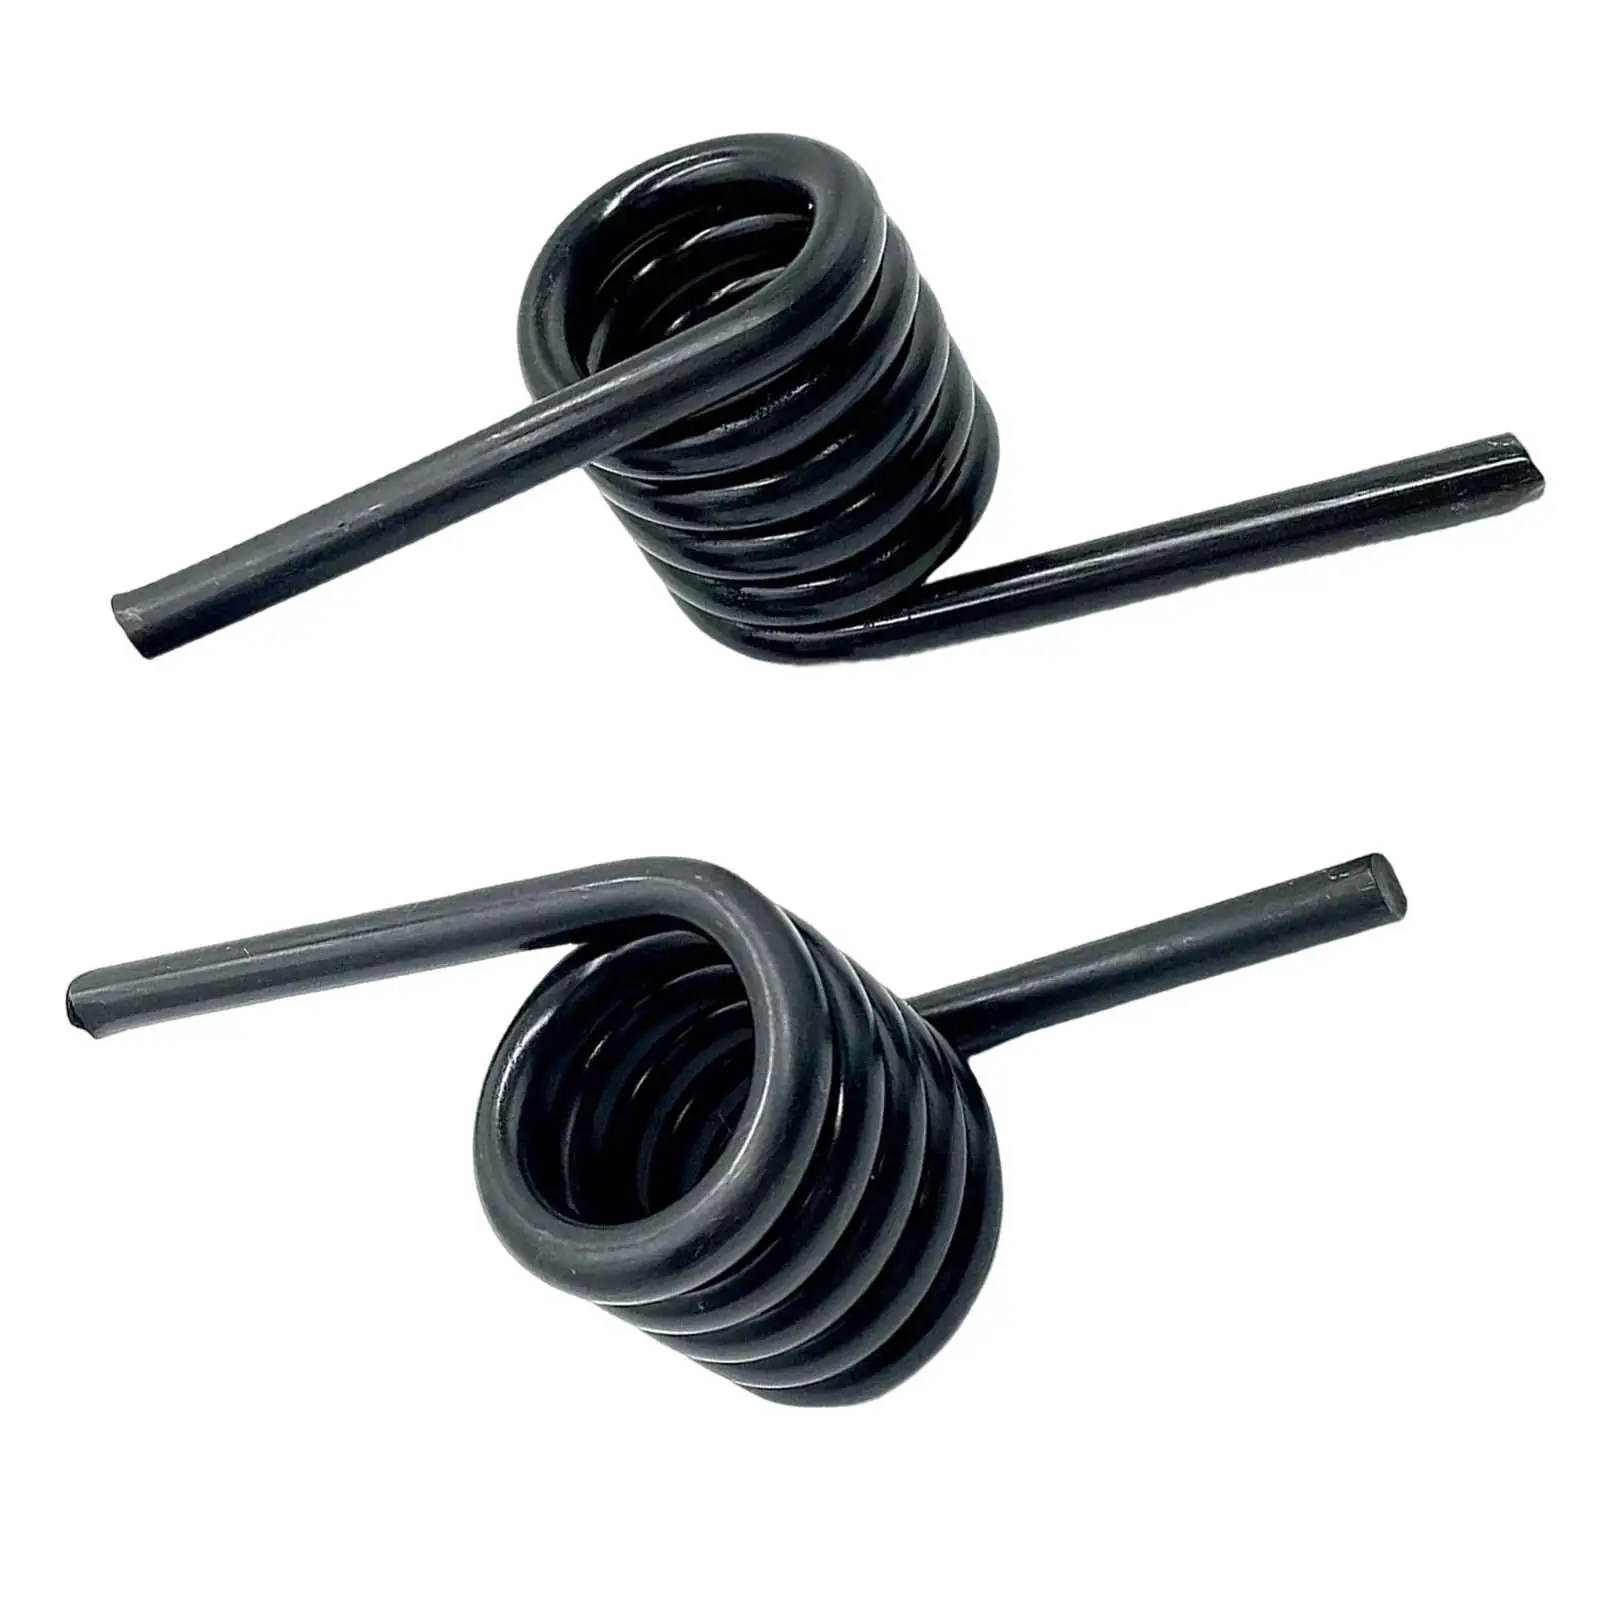 2Pcs Torsion Ramp Spring 3034278 Left & Right Hand Black Replacement Part High Strength for Trailer Ramps Durable Professional